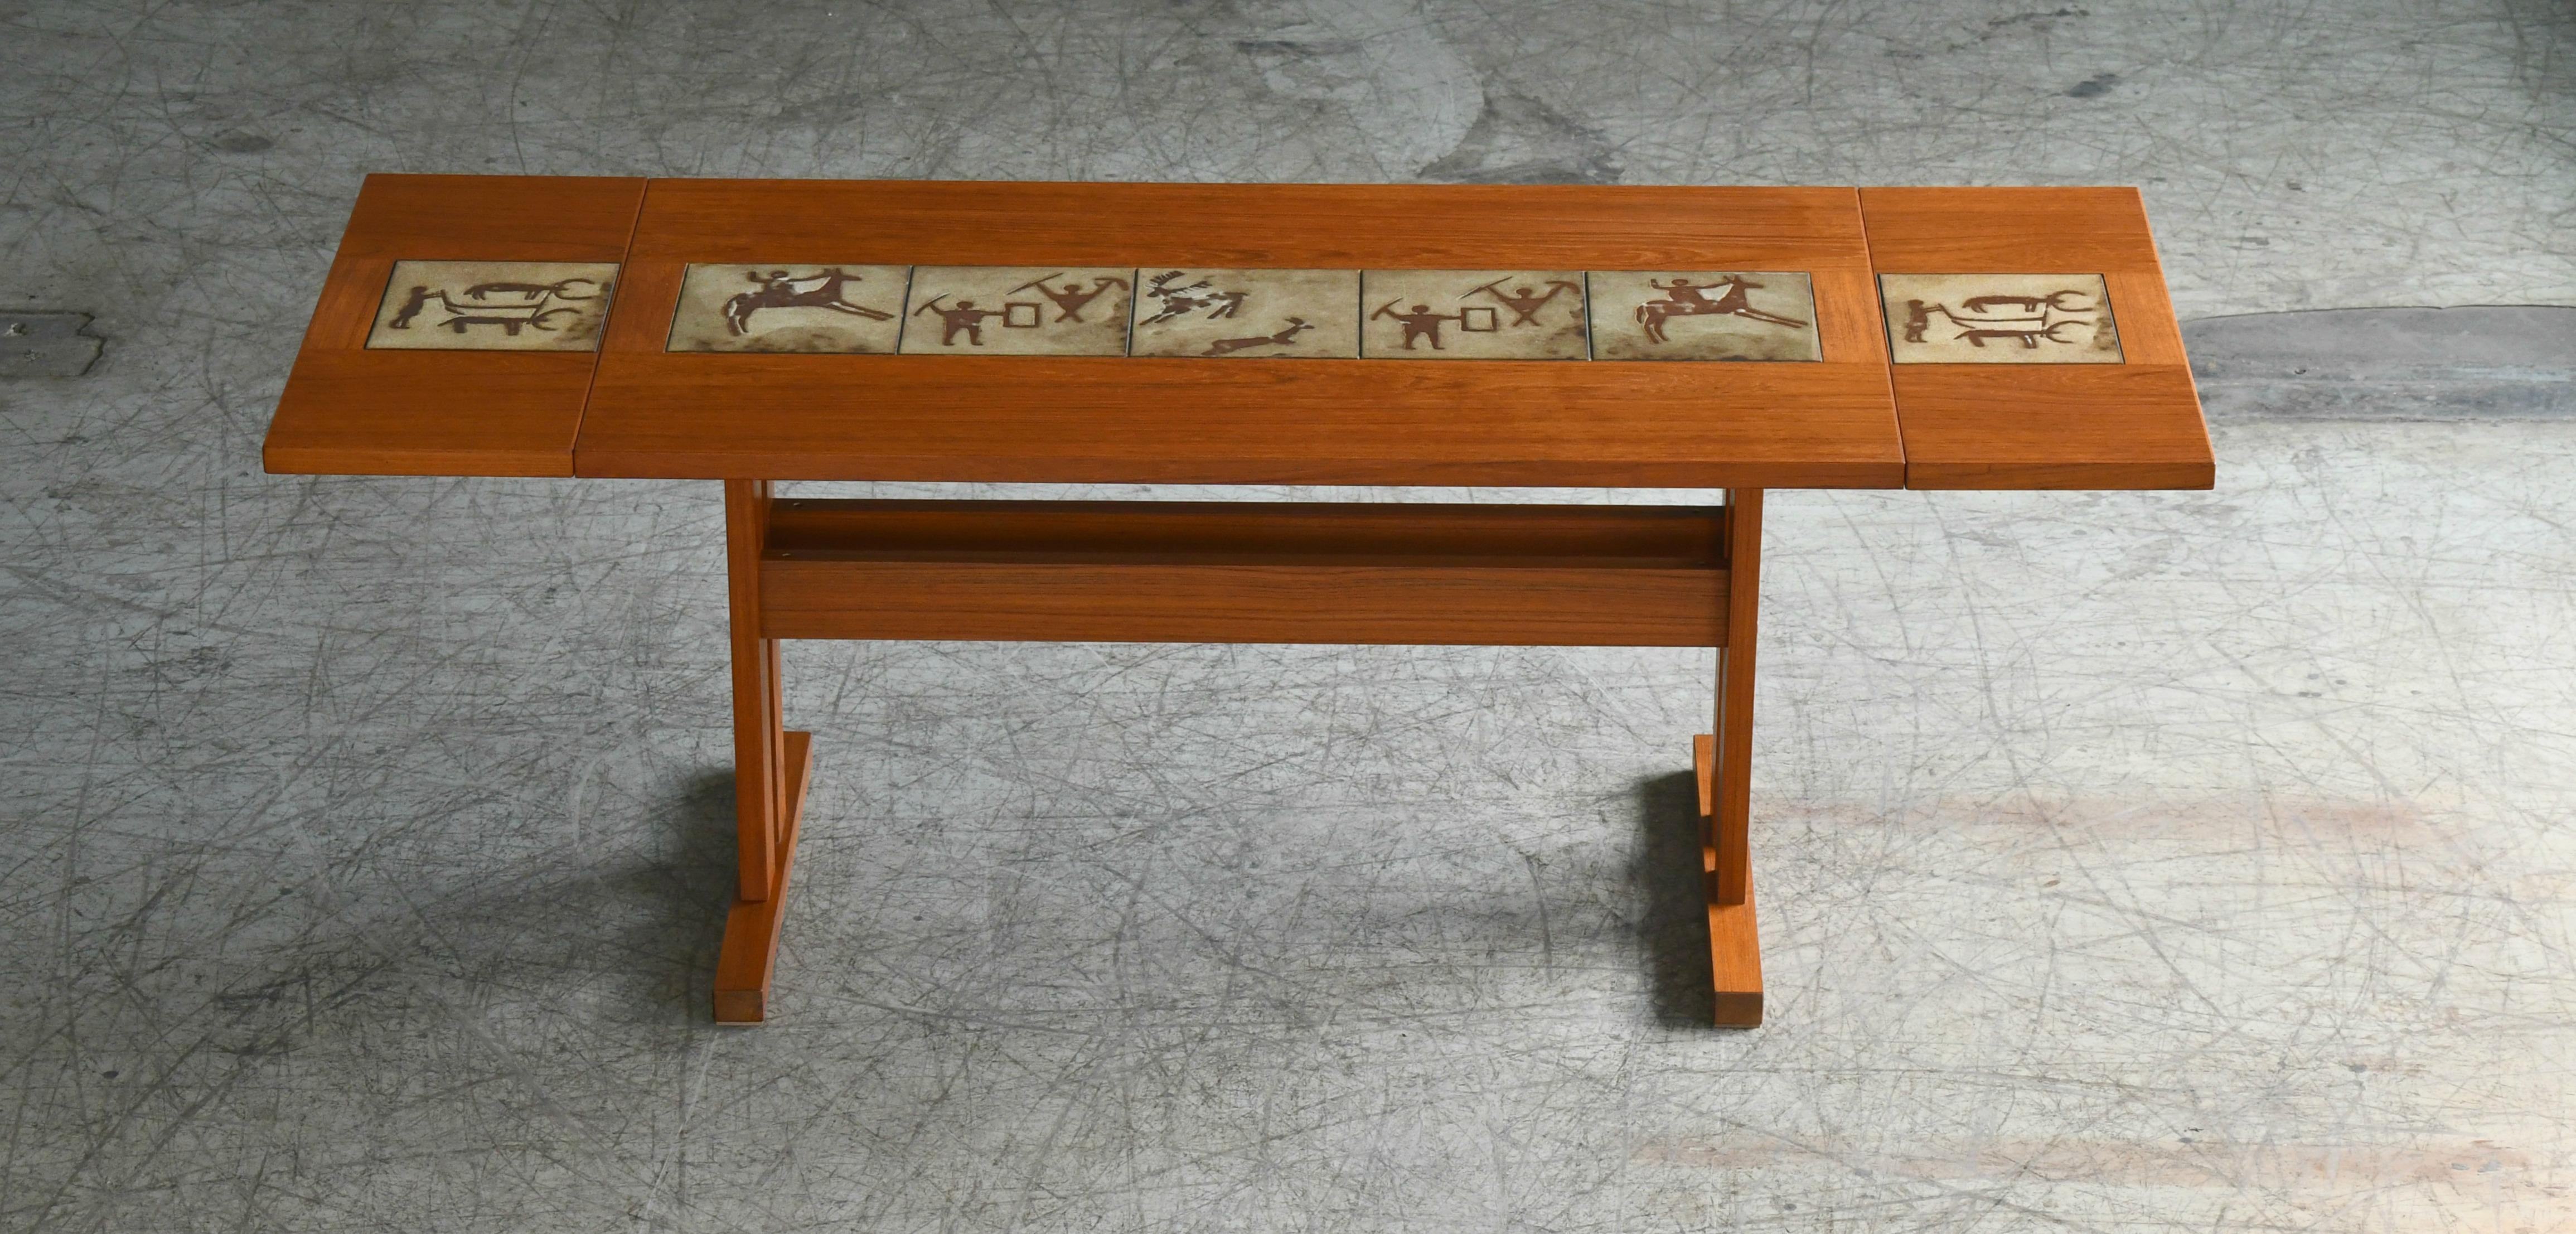 Danish Extension Dining Table in Teak with Ceramic Tiles, circa 1970 For Sale 5